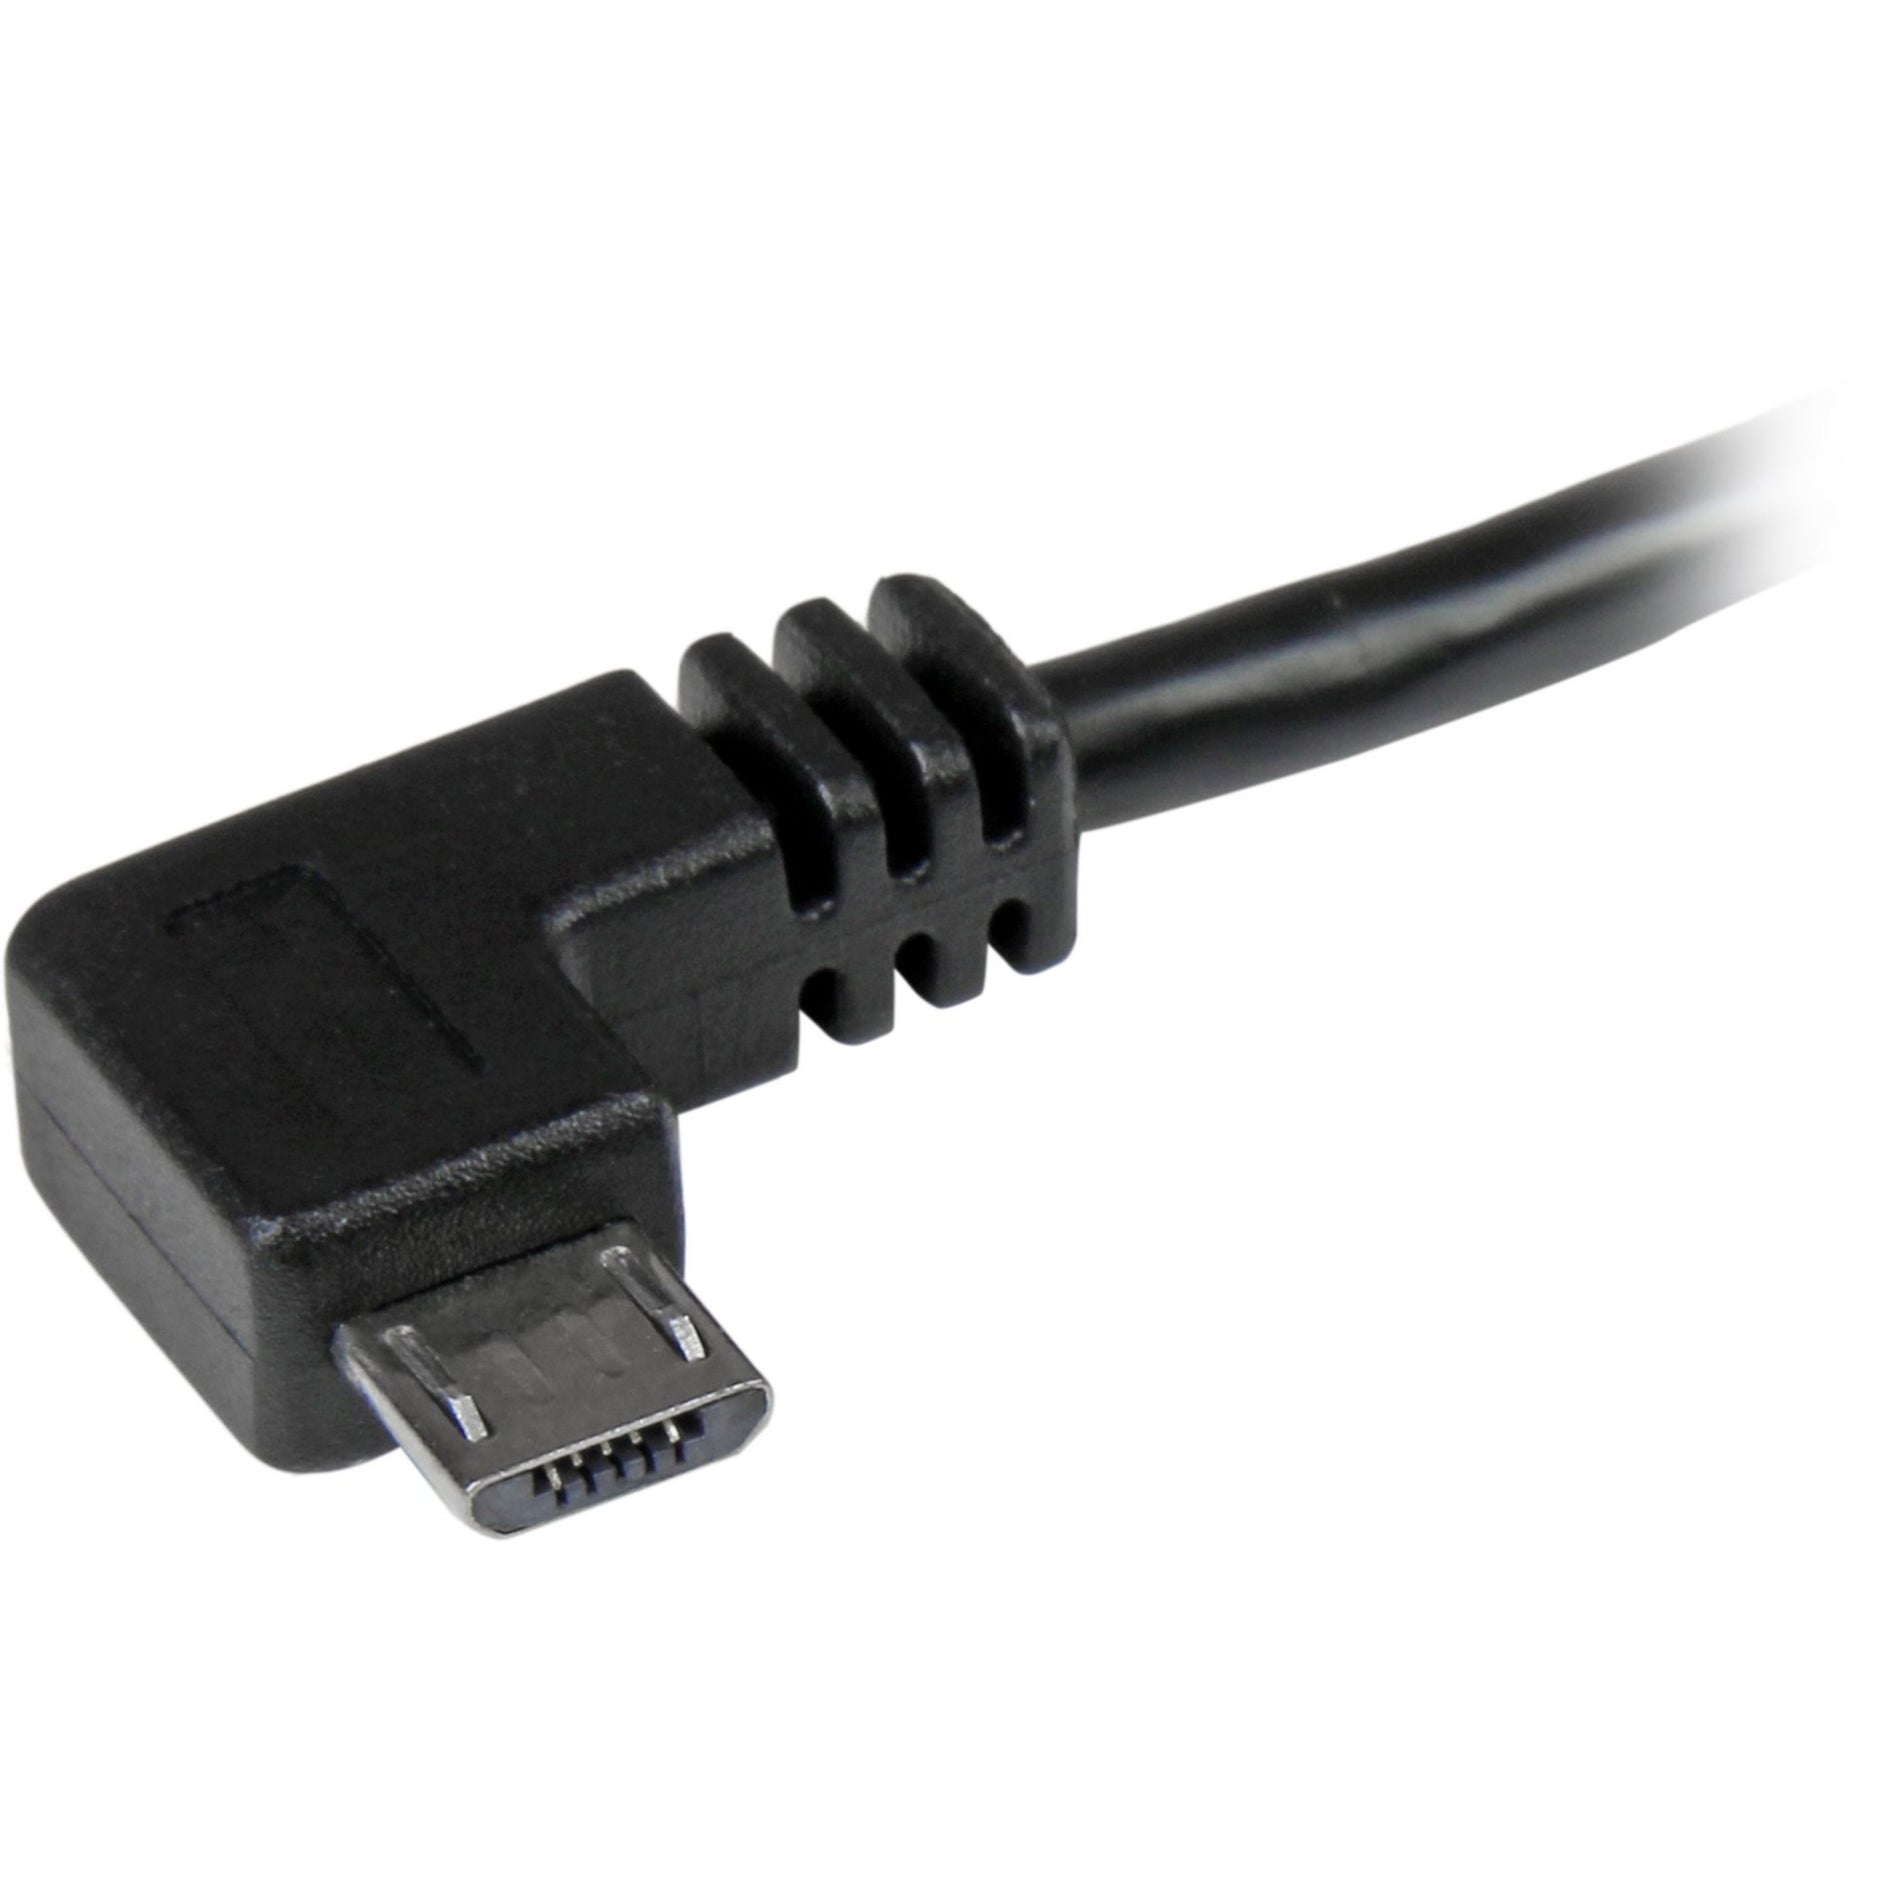 StarTech.com USB2AUB2RA2M Micro-USB Cable with Right-Angled Connectors - M/M - 2m (6ft), Fast Charging, Bend Resistant